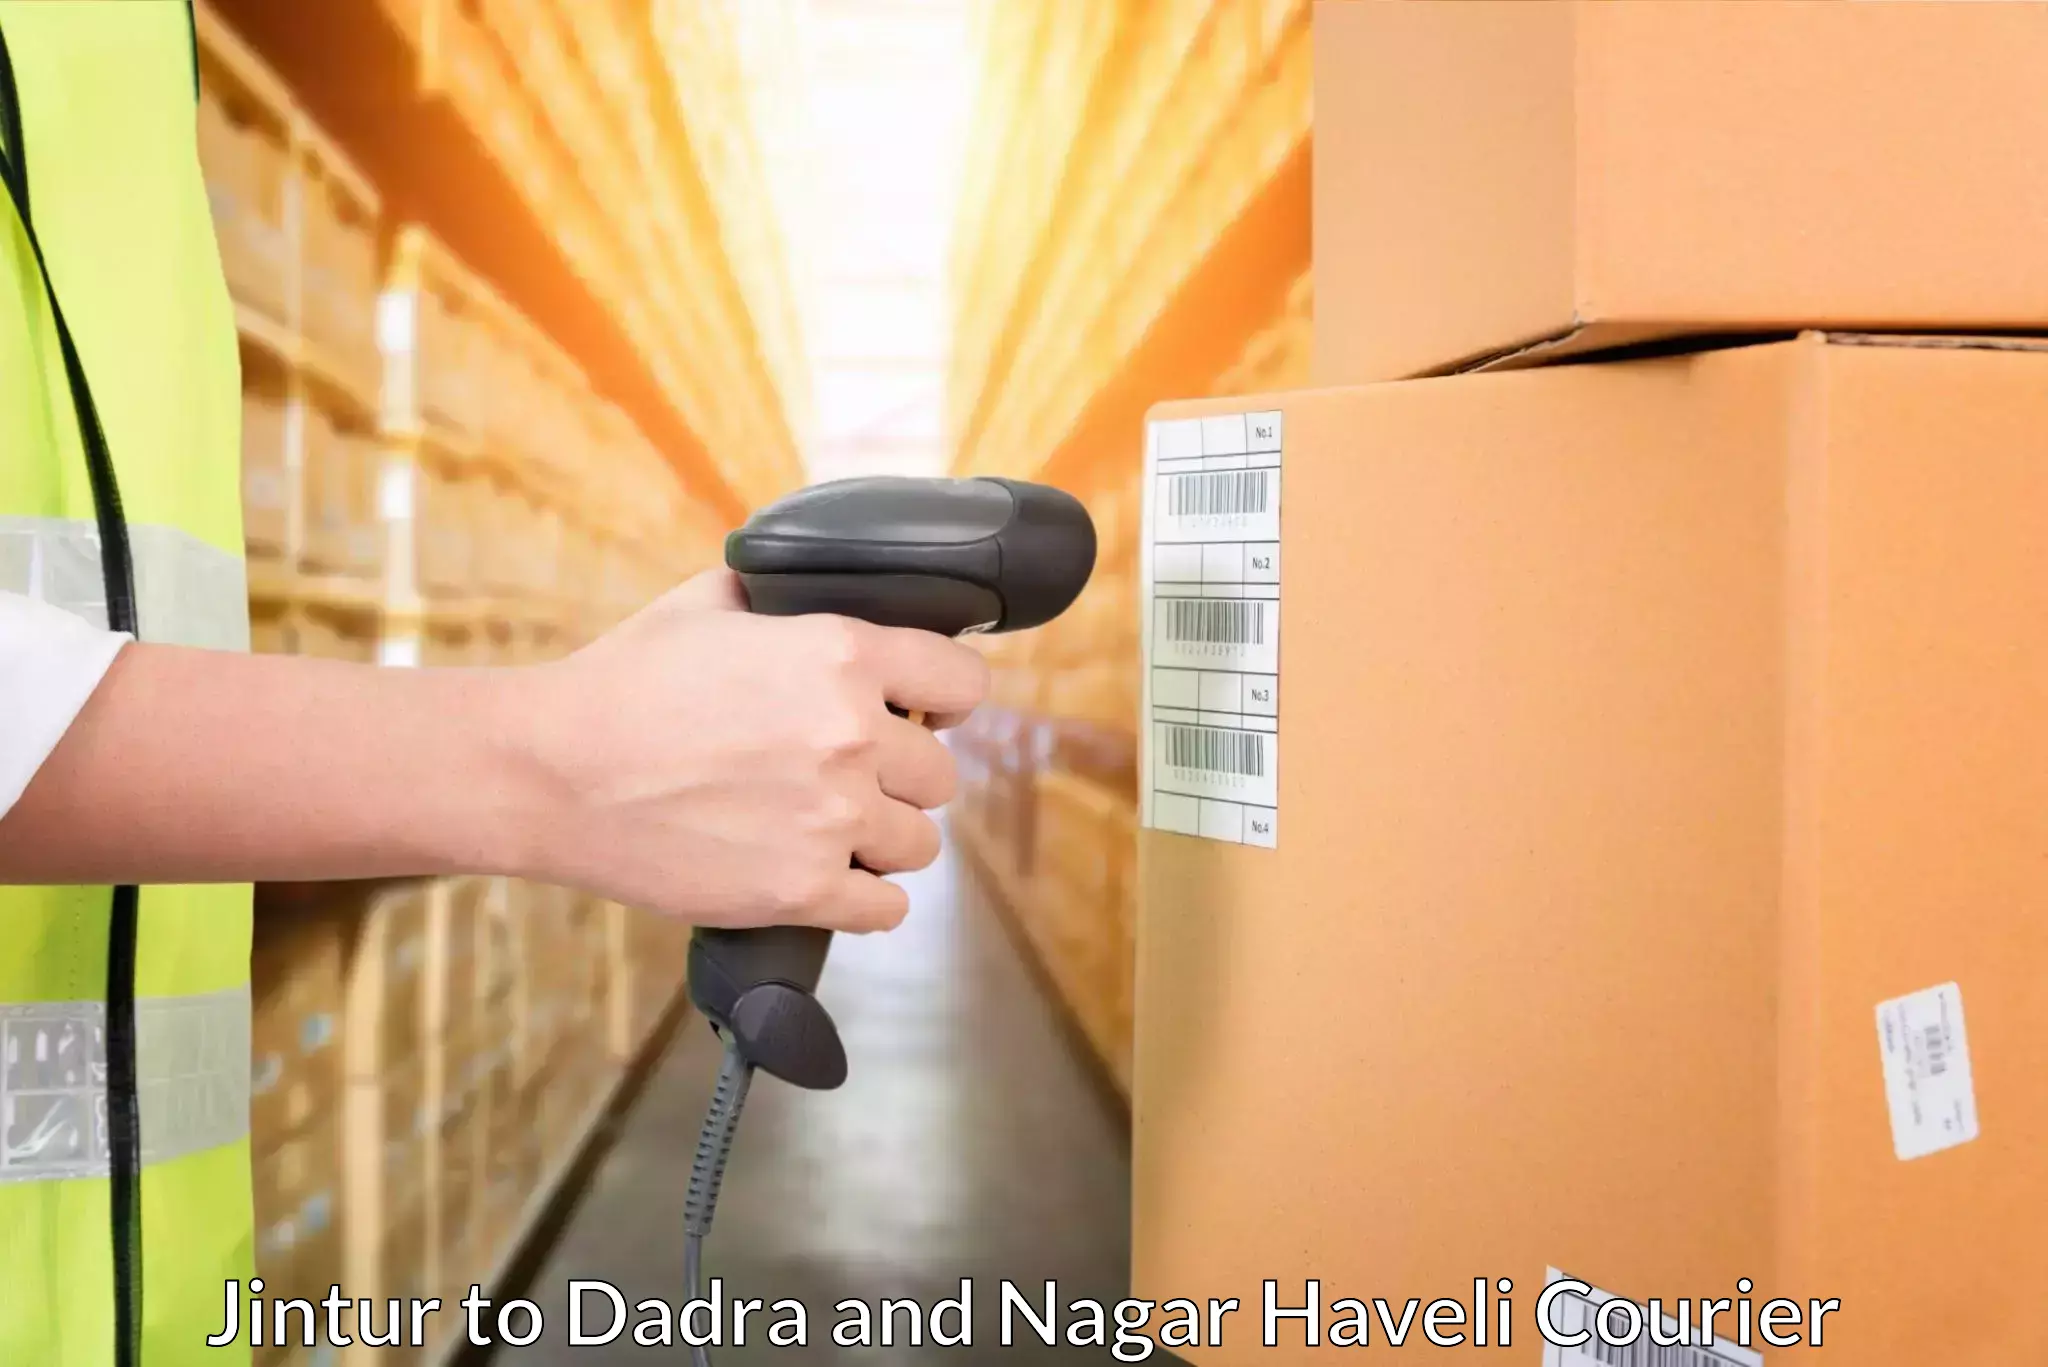 Small business couriers Jintur to Dadra and Nagar Haveli